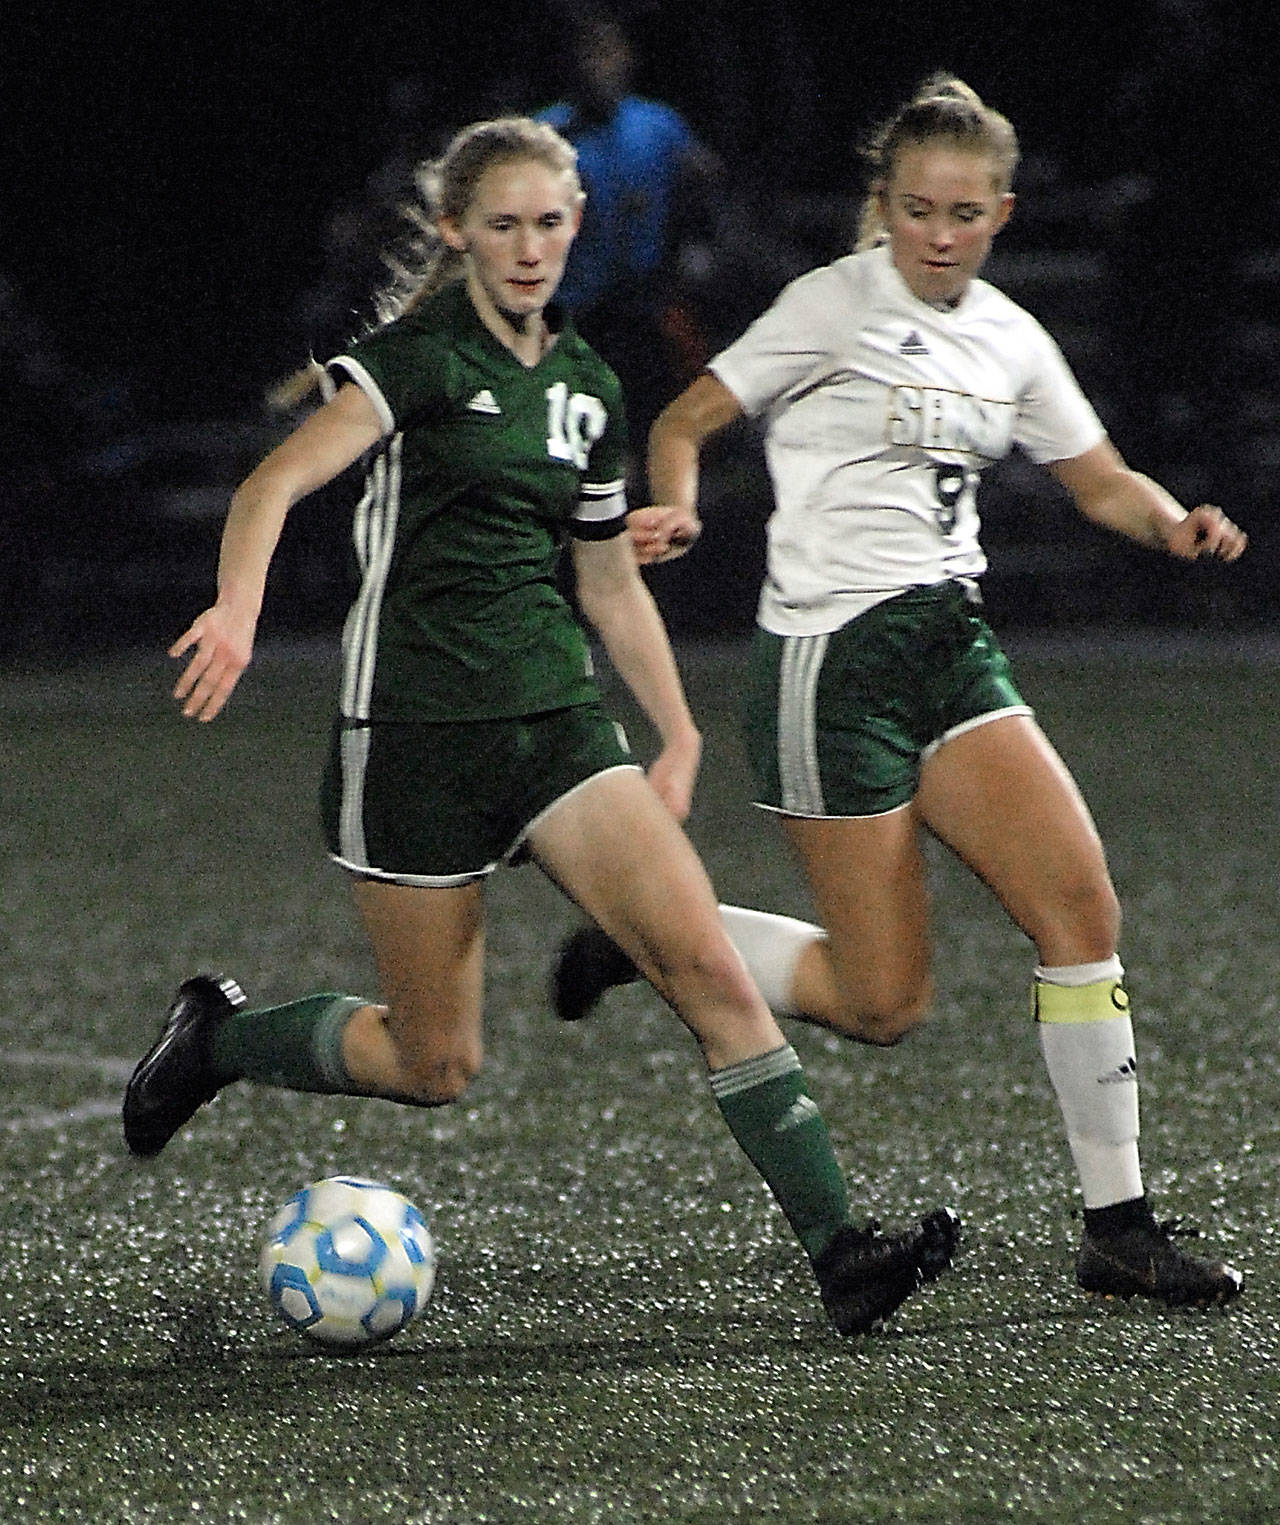 Keith Thorpe/Peninsula Daily News Port Angeles’ Millie Long, left, was named the Olympic League 2A girls’ soccer MVP. Long scored 33 goals this season to go along with 11 assists.